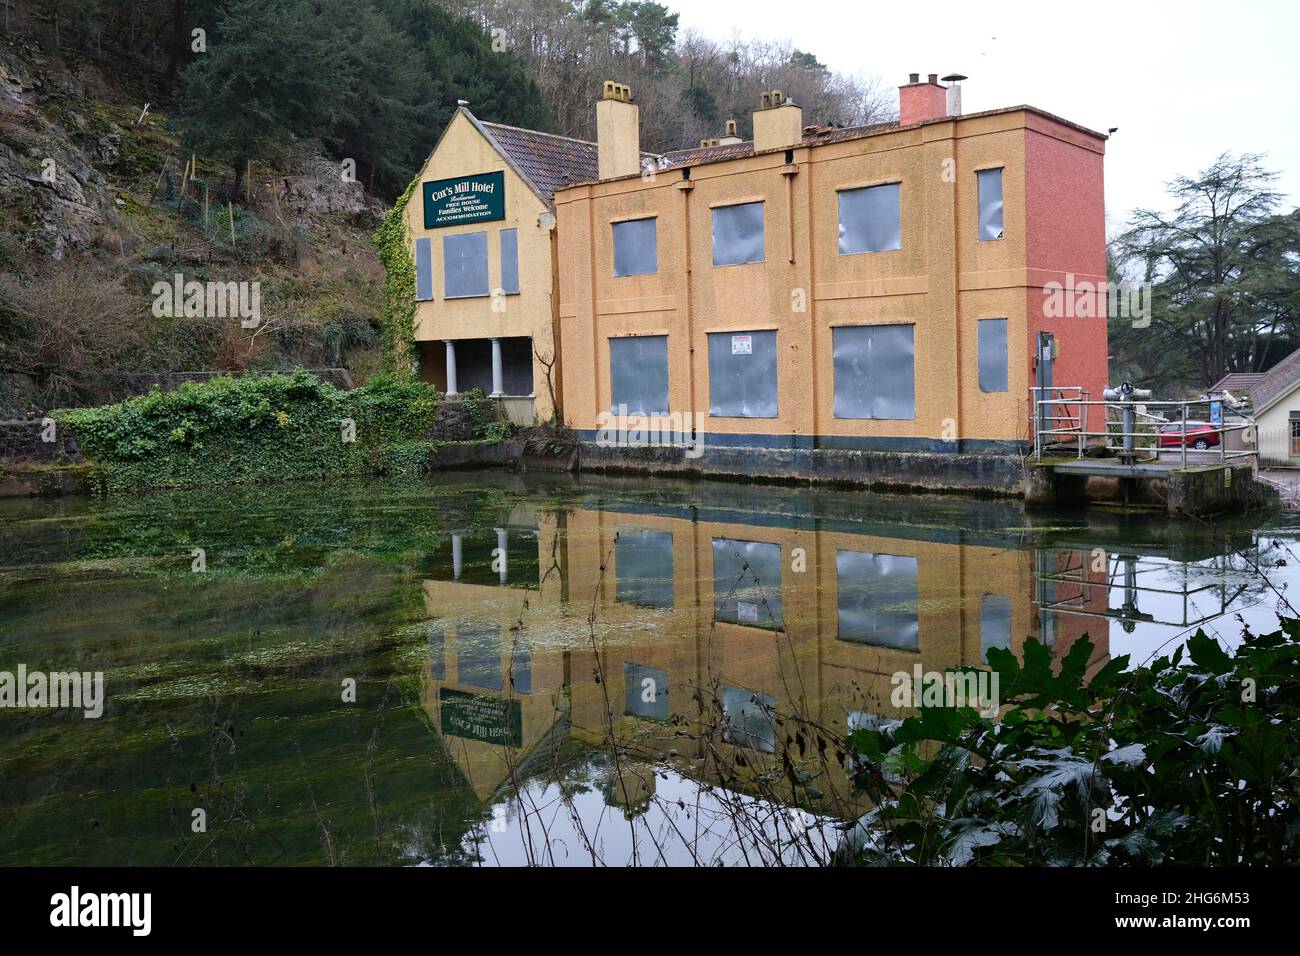 January 2022 - The empty Cox's Mill hotel in Cheddar, Somerset, England, UK. Stock Photo